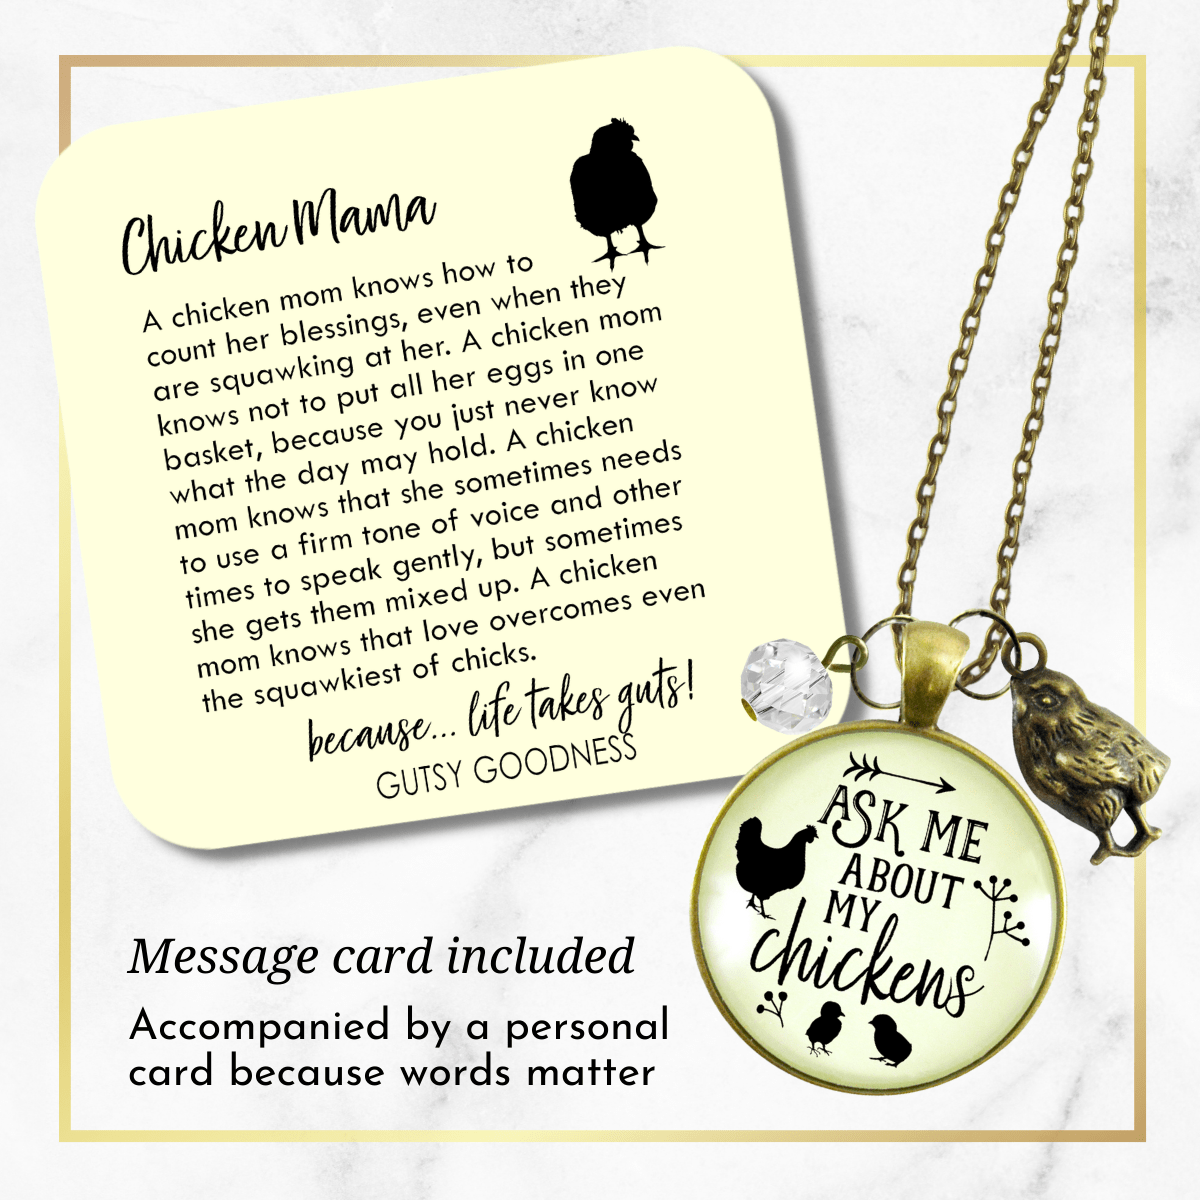 Gutsy Goodness Chicken Mom Necklace Ask Me About My Chickens Novelty Gift Farm Life Inspired - Gutsy Goodness;Chicken Mom Necklace Ask Me About My Chickens Novelty Gift Farm Life Inspired - Gutsy Goodness Handmade Jewelry Gifts